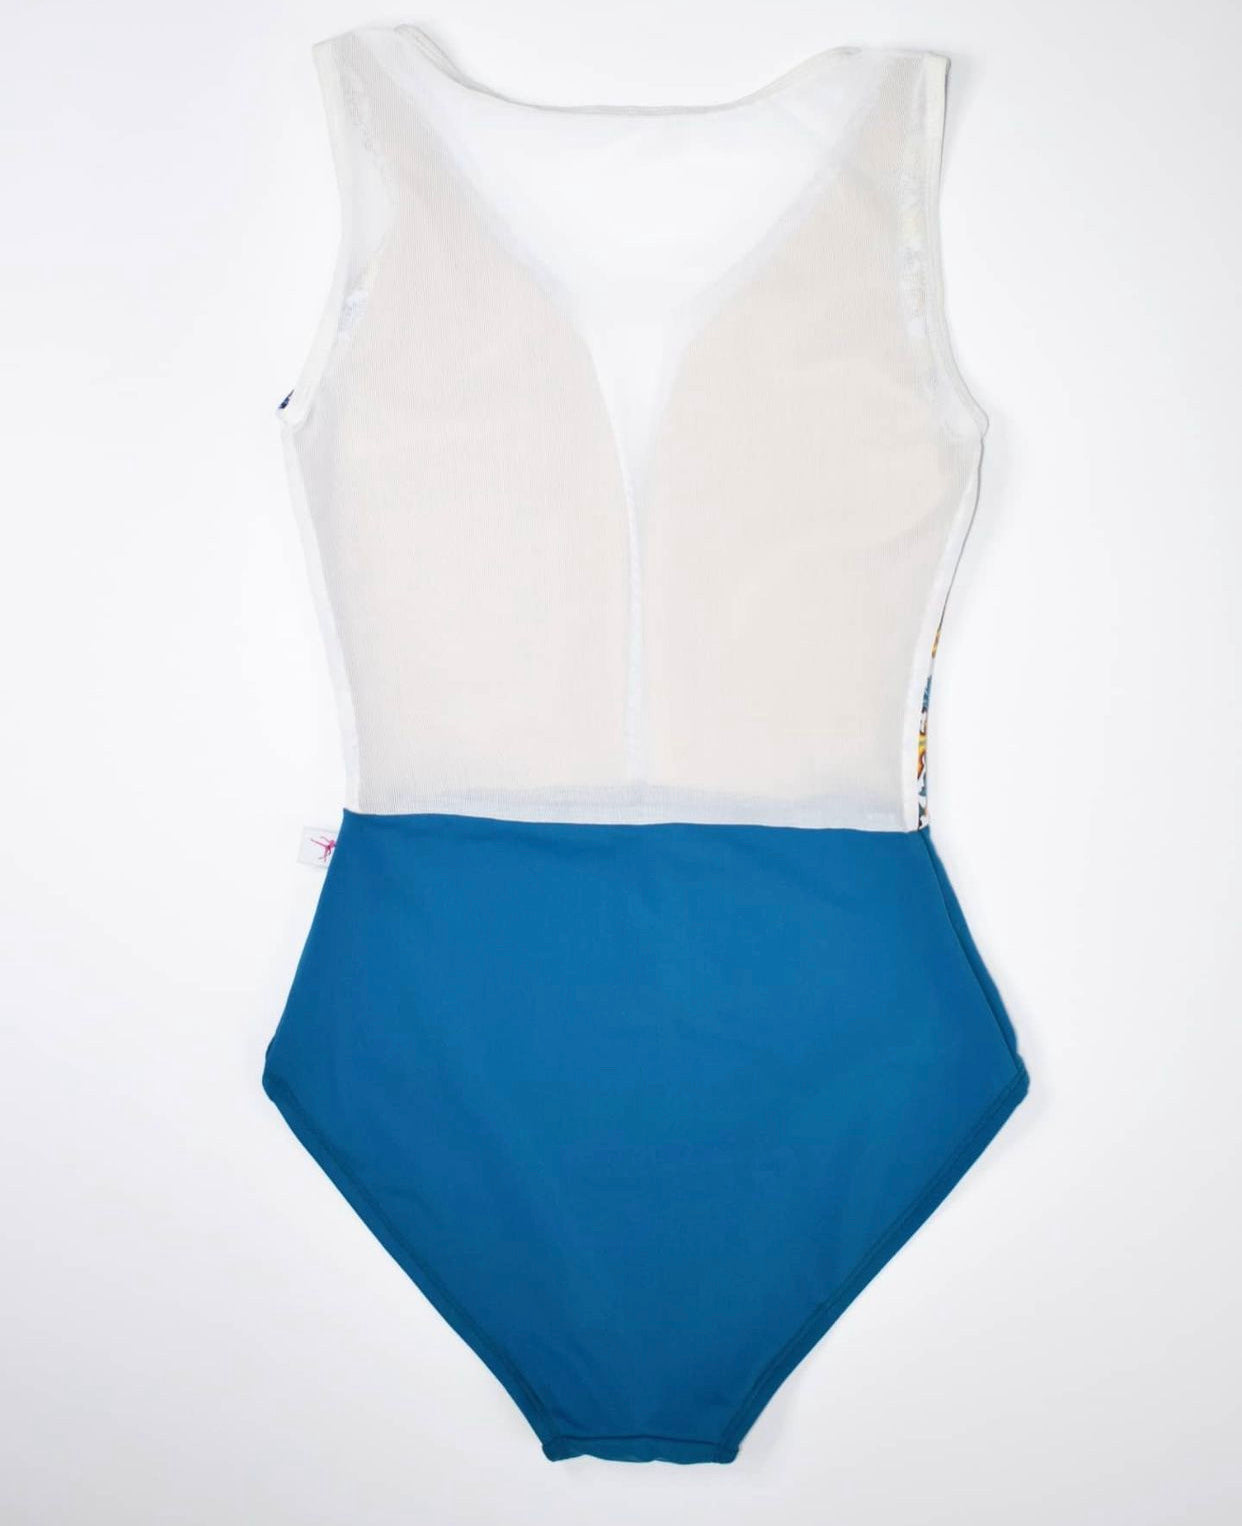 passione ballet dance leotard with pattern vietri sul mare from sole dancewear sold by Thev Collective Dancewear 